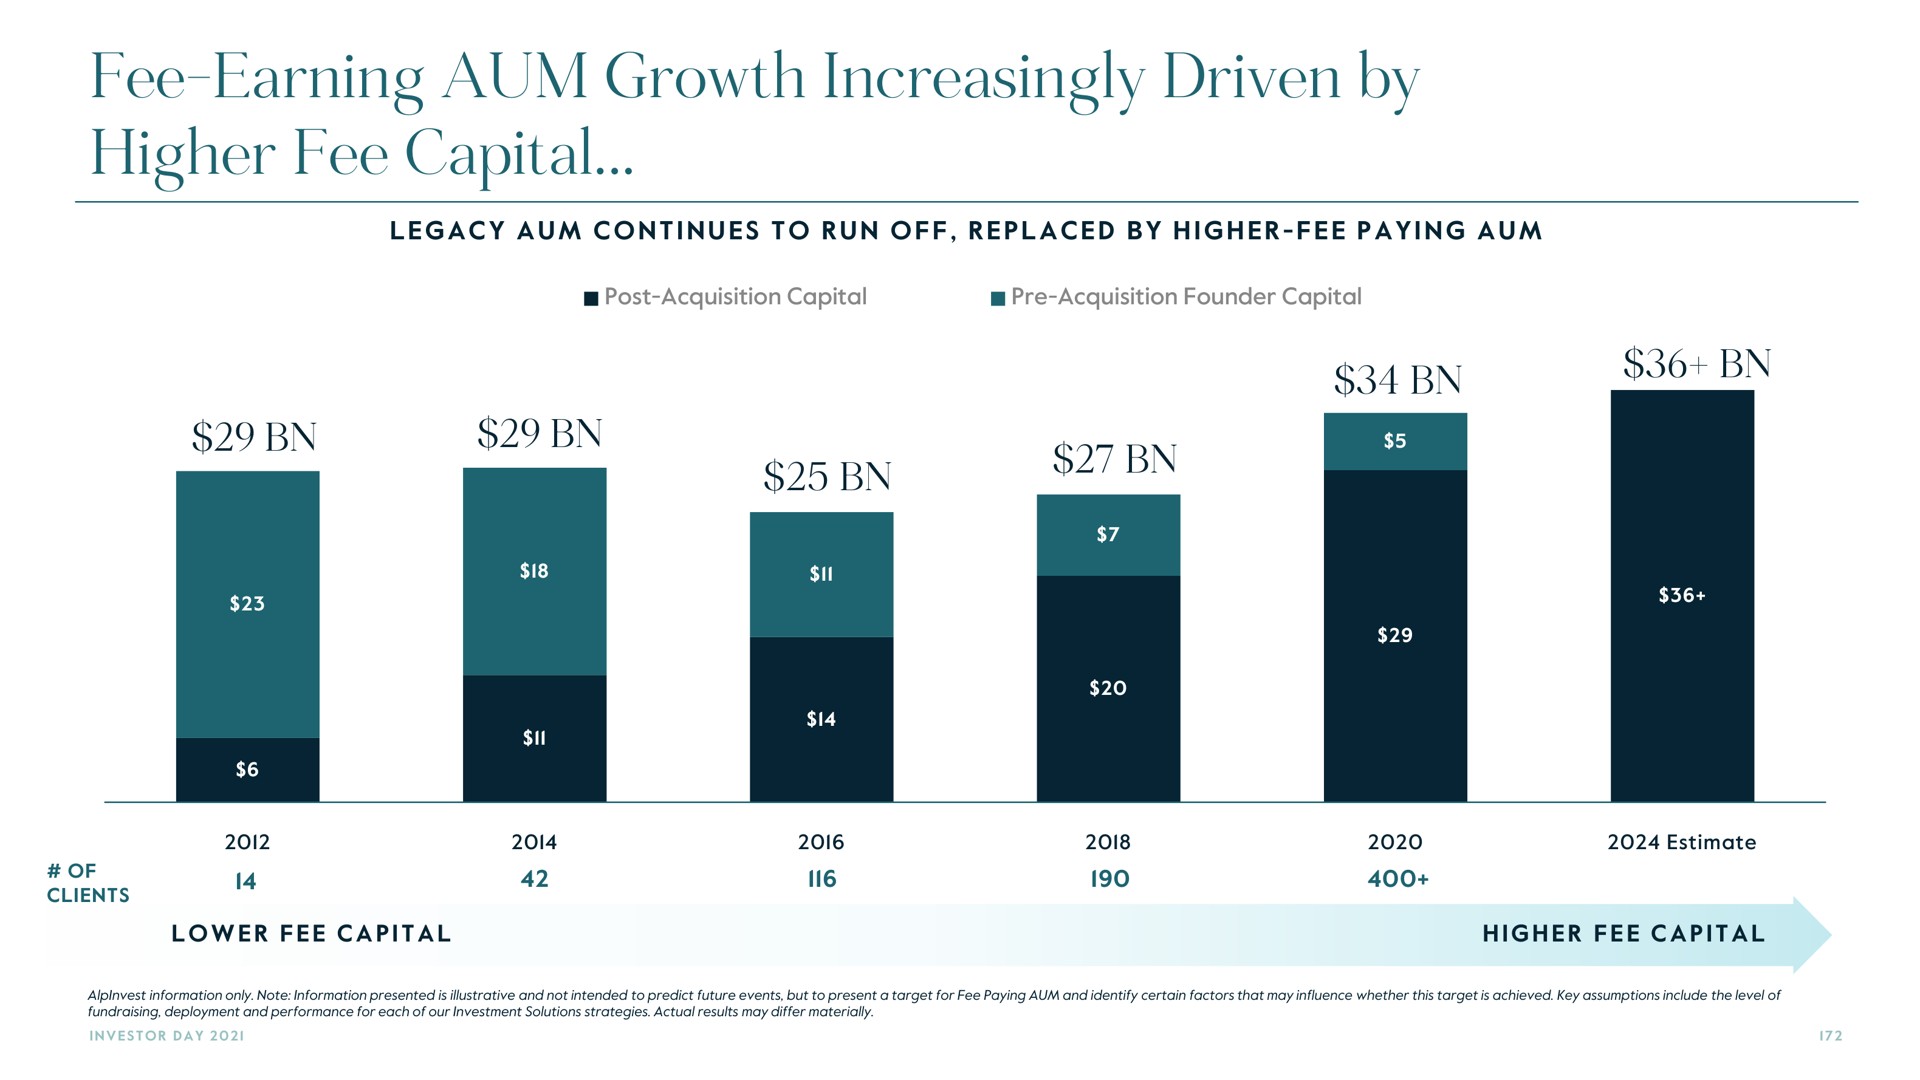 fee earning aum growth increasingly driven by higher fee capital | Carlyle